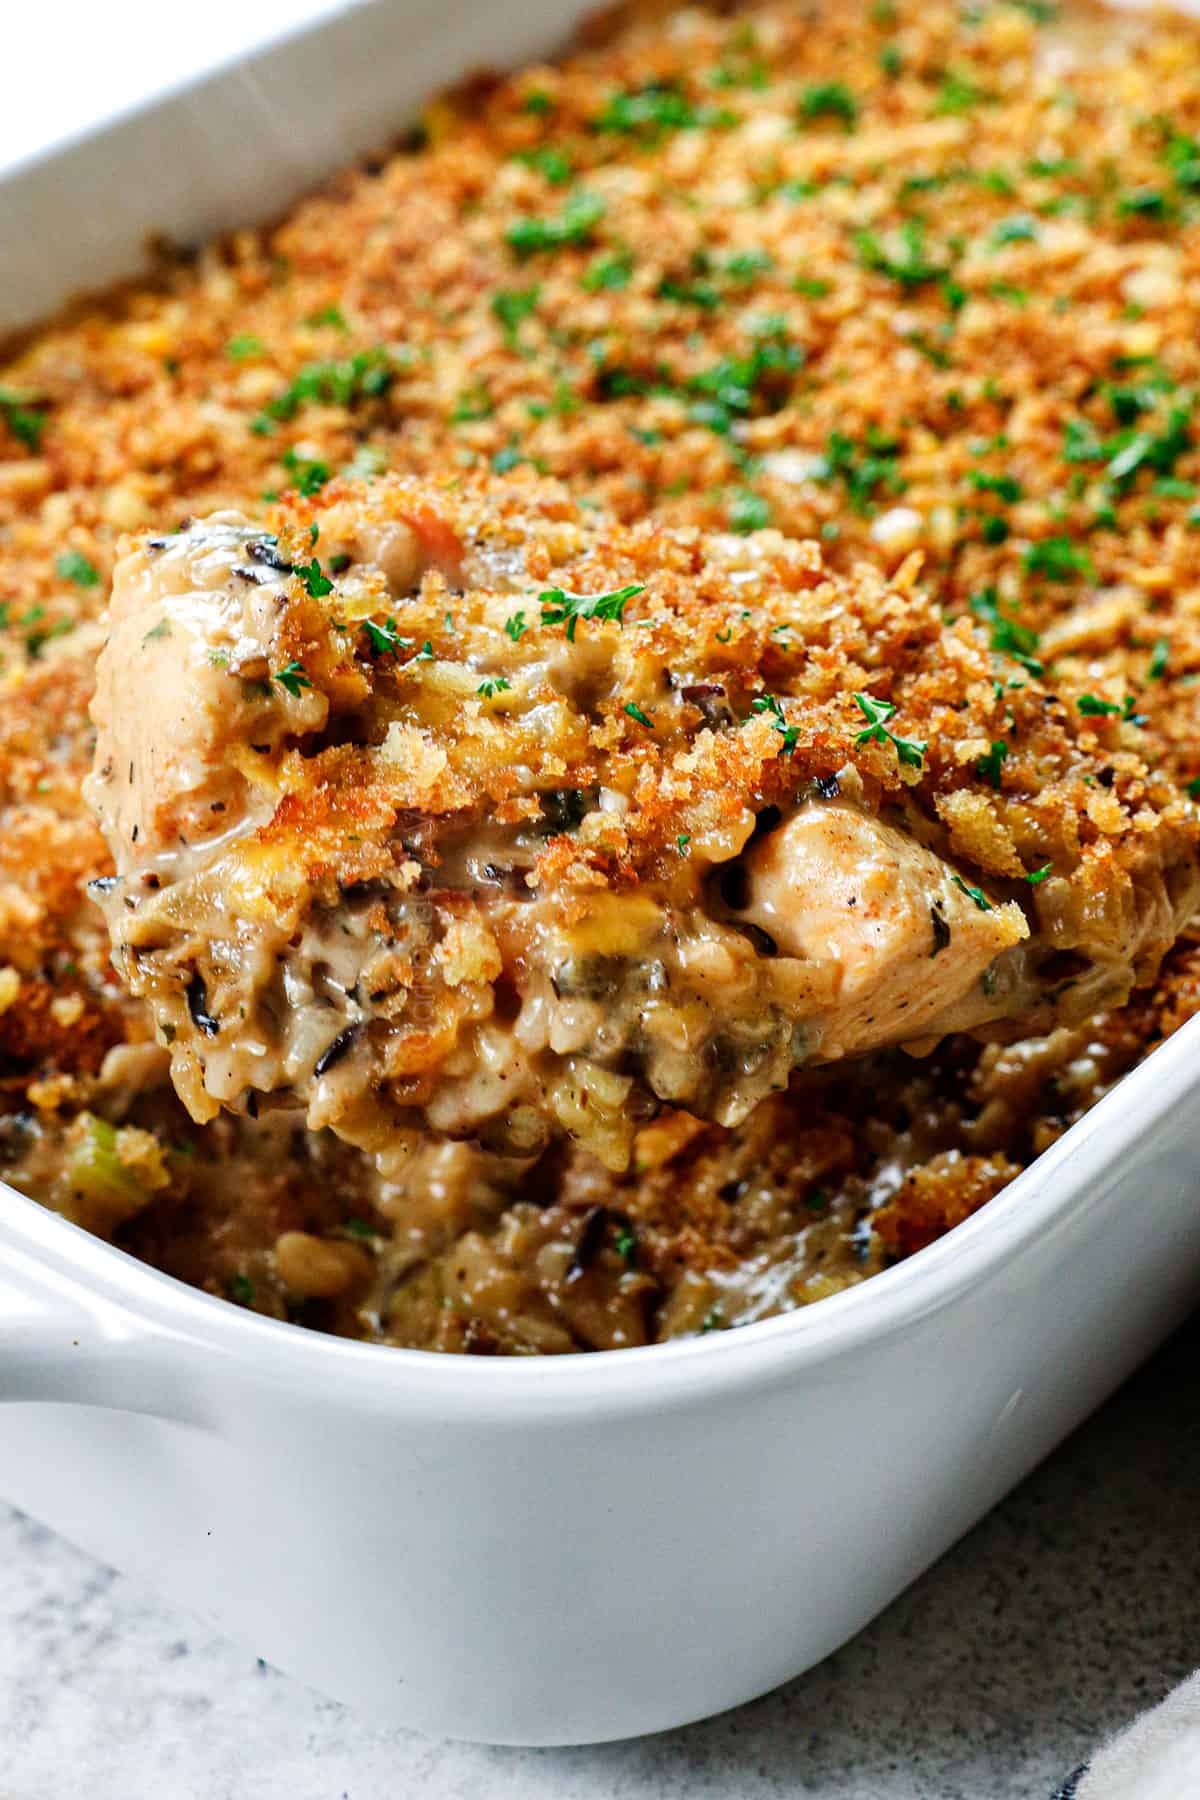 scooping up chicken and wild rice casserole recipe showing all of the ingredients and how creamy it is